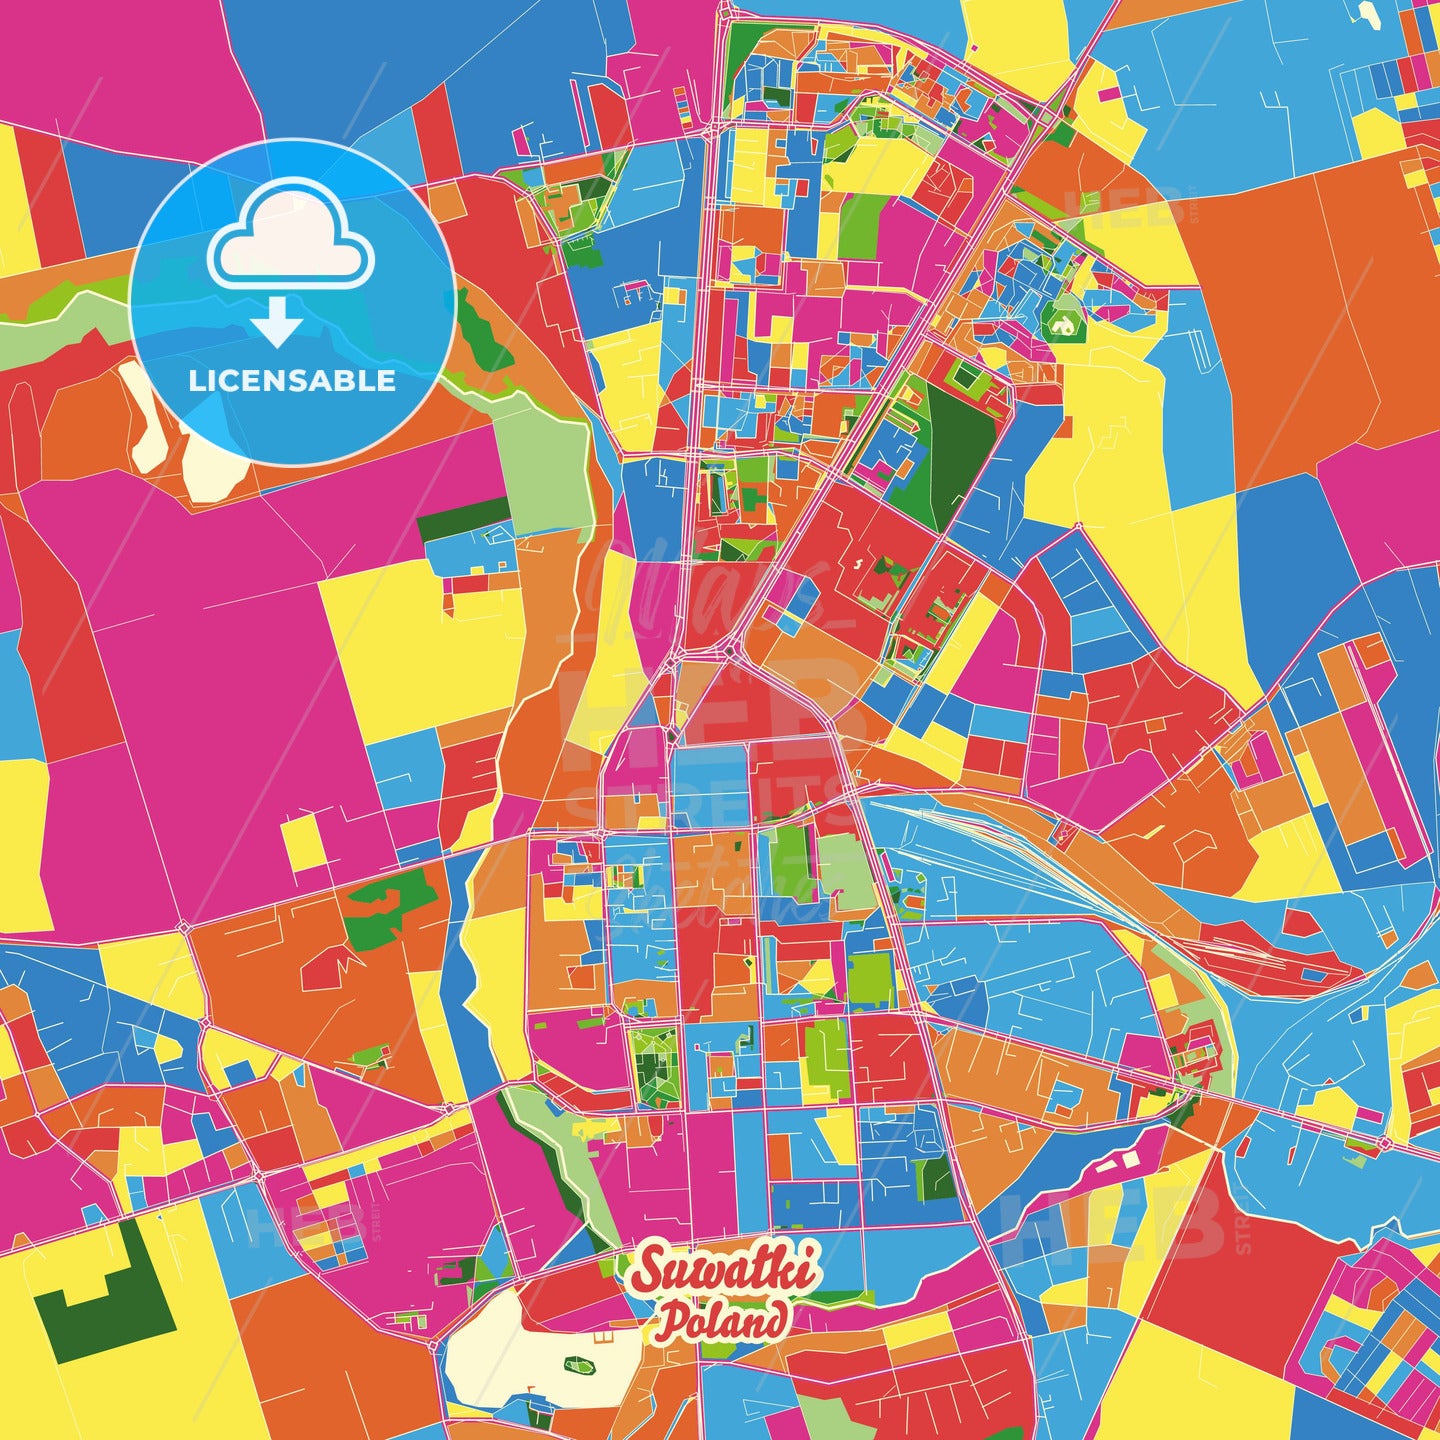 Suwałki, Poland Crazy Colorful Street Map Poster Template - HEBSTREITS Sketches